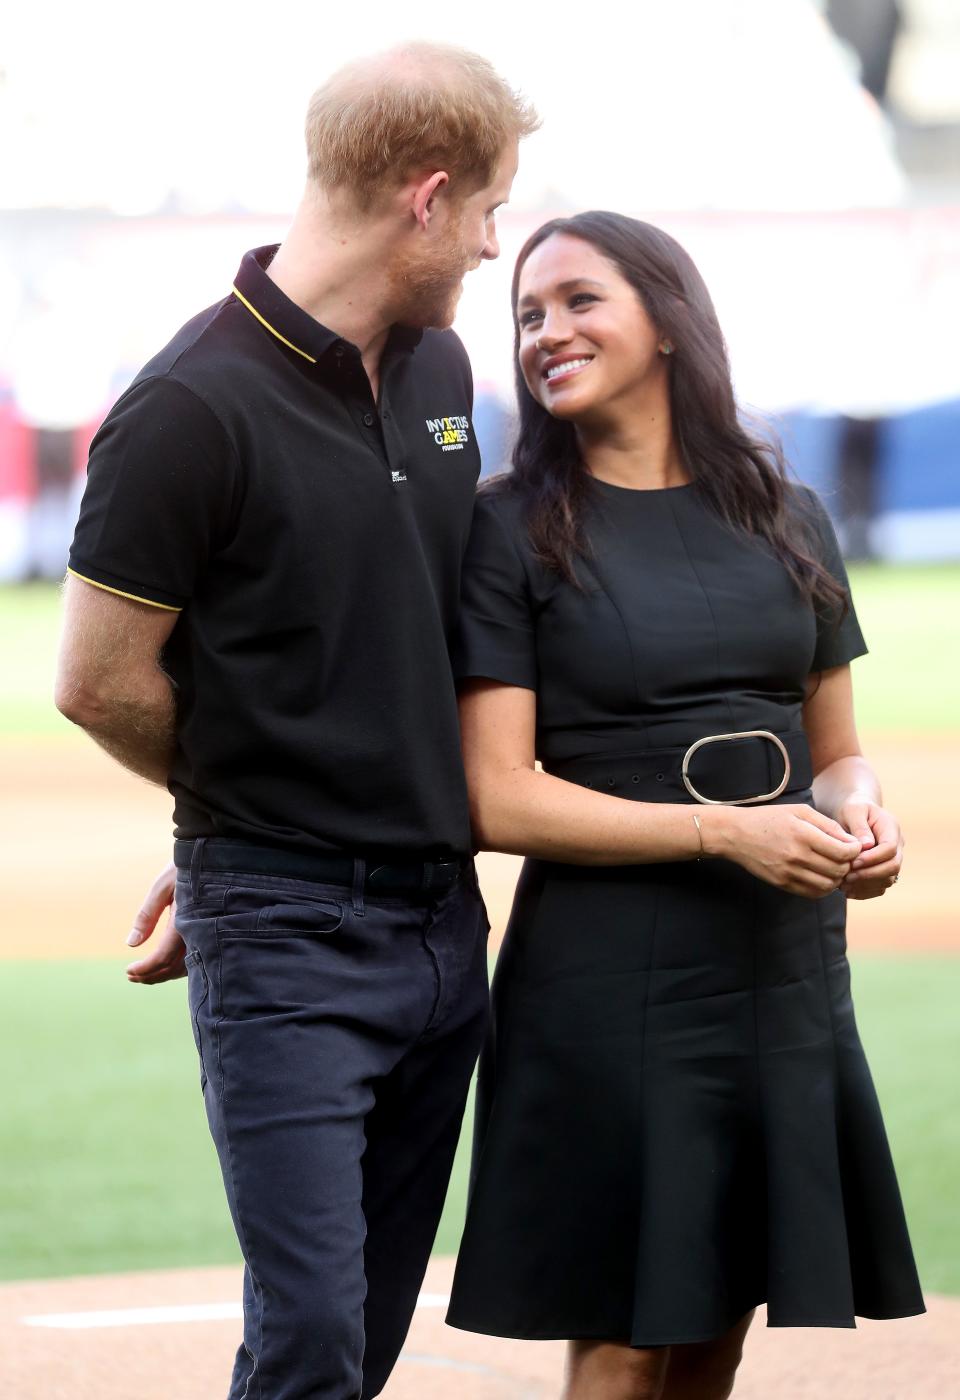 Meghan Markle & Prince Harry's PDA at the London Series Was Swoon-Worthy